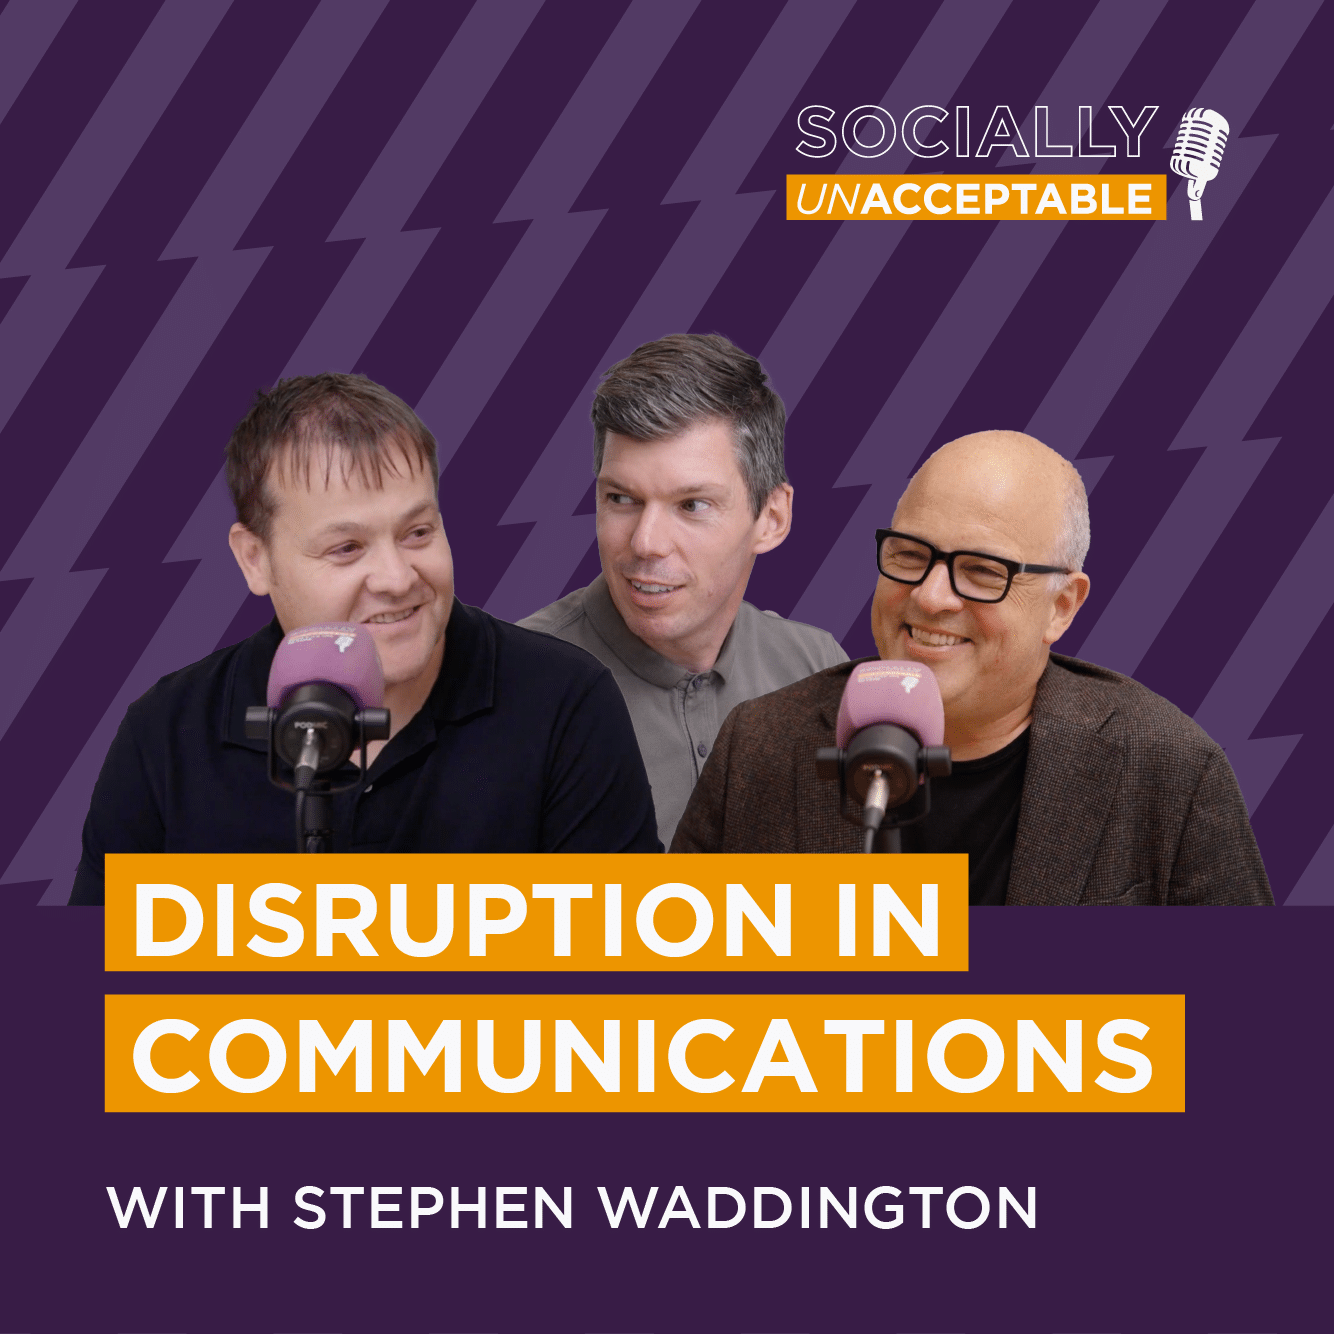 My Interview on Disruption in Communications with former CIPR President, Stephen Waddington